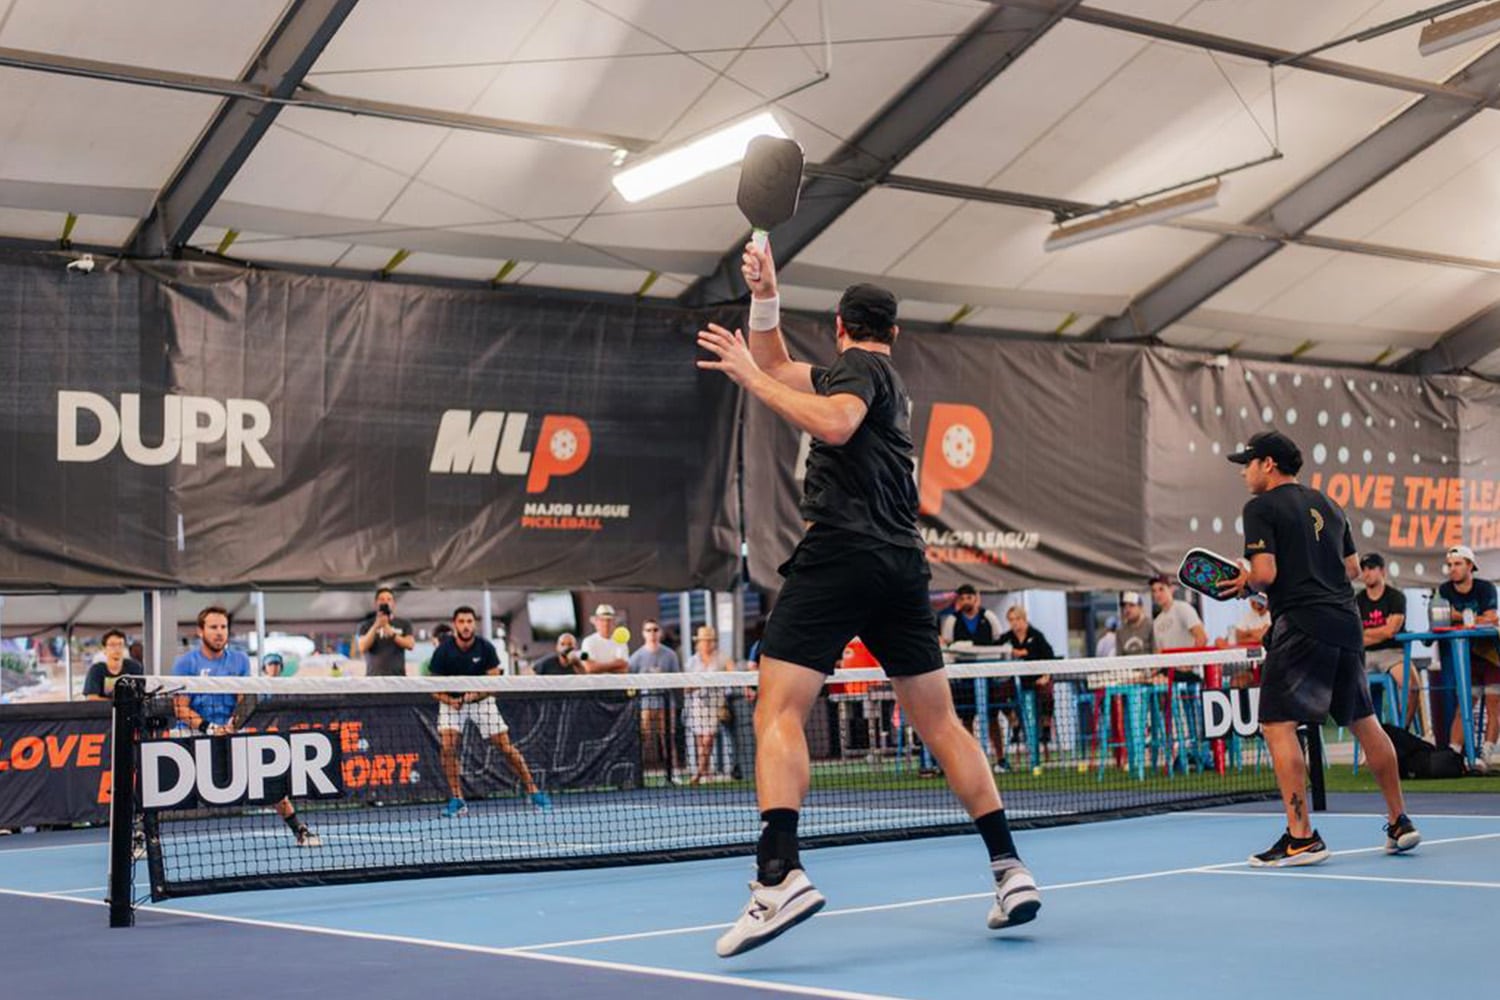 Men play a doubles game of pickle ball on the Major League Pickleball circuit